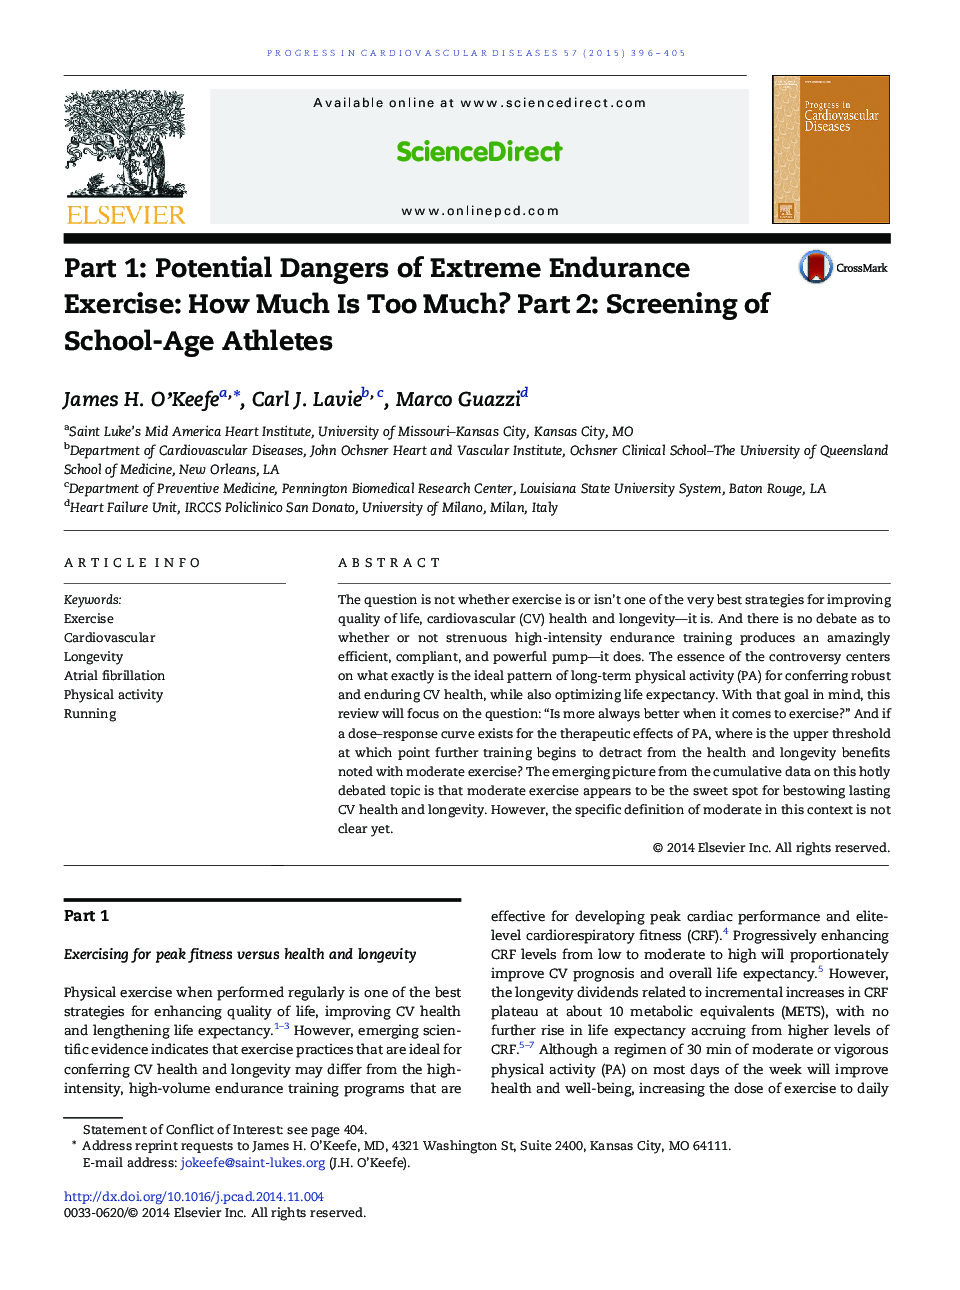 Part 1: Potential Dangers of Extreme Endurance Exercise: How Much Is Too Much? Part 2: Screening of School-Age Athletes 